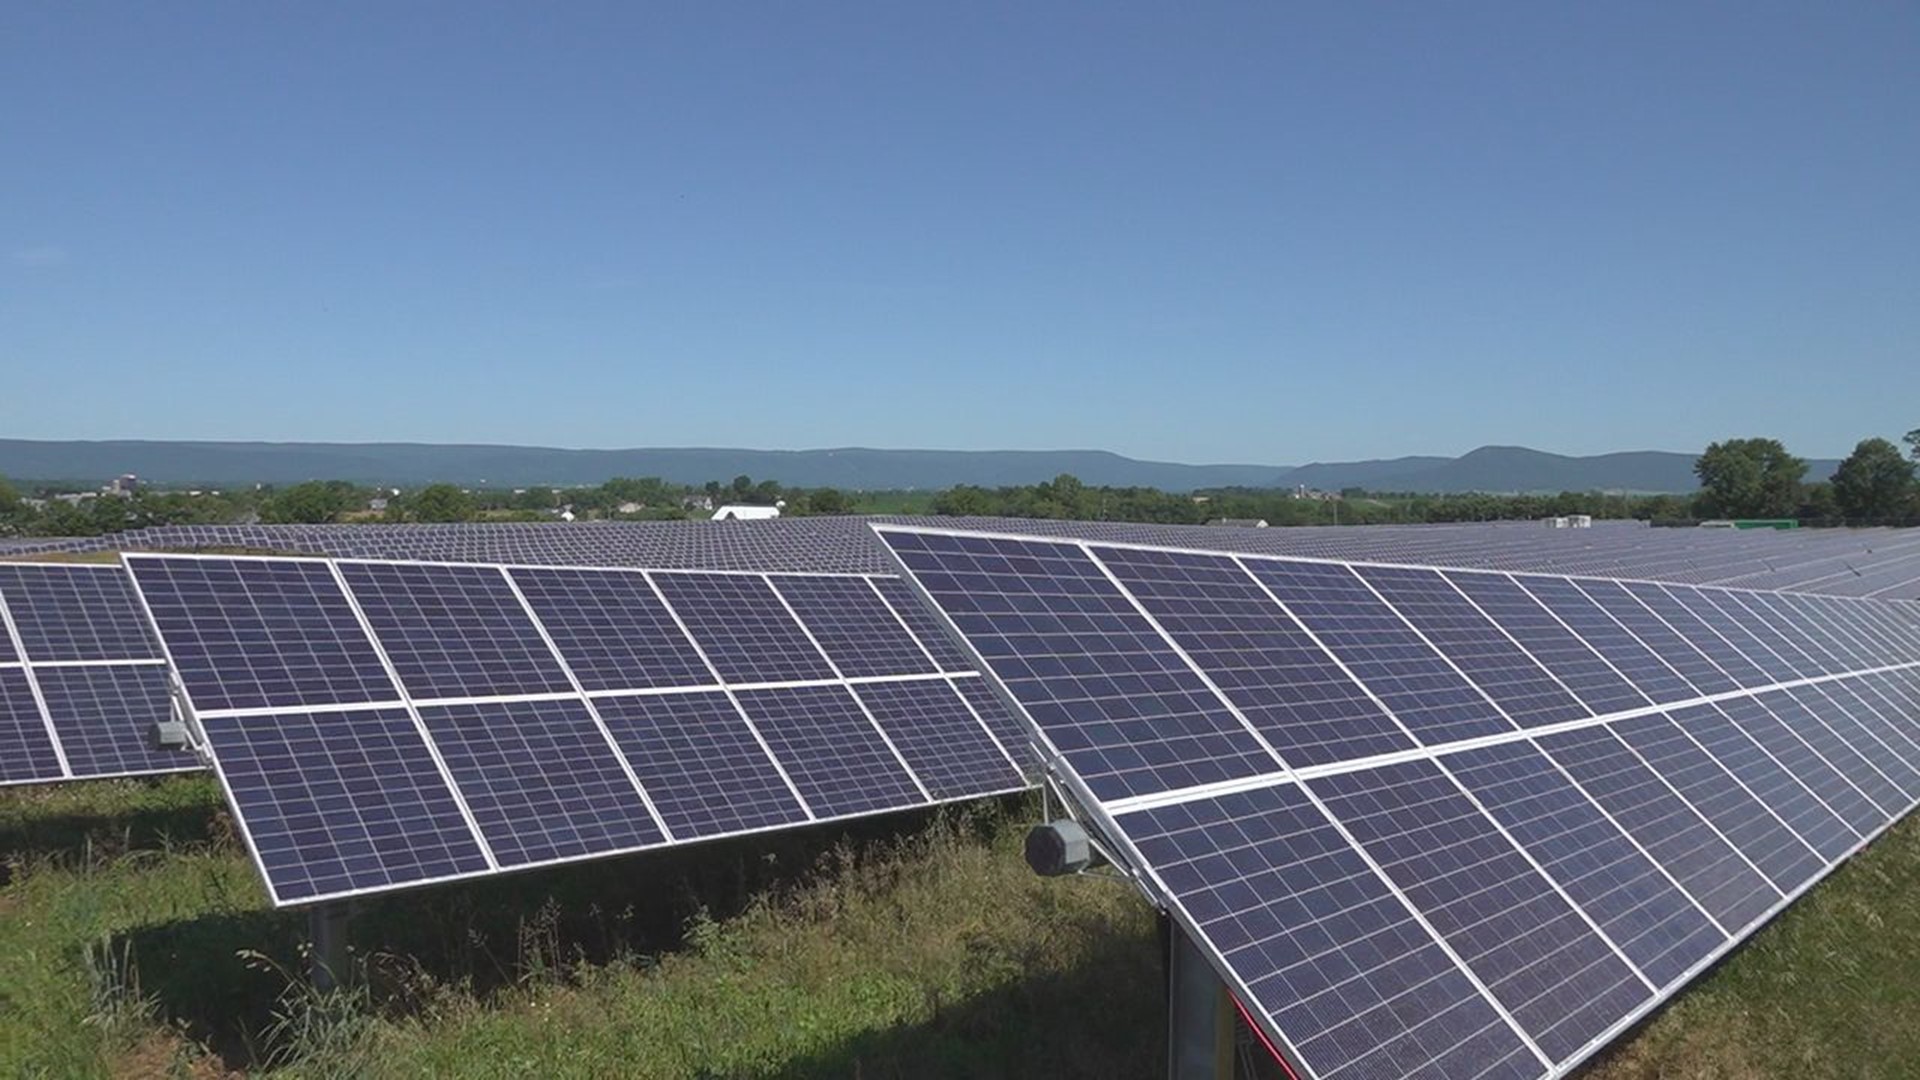 Renewable energy company Enel Green Power hopes to transform 600 acres of the York County township's farmland into a solar field.